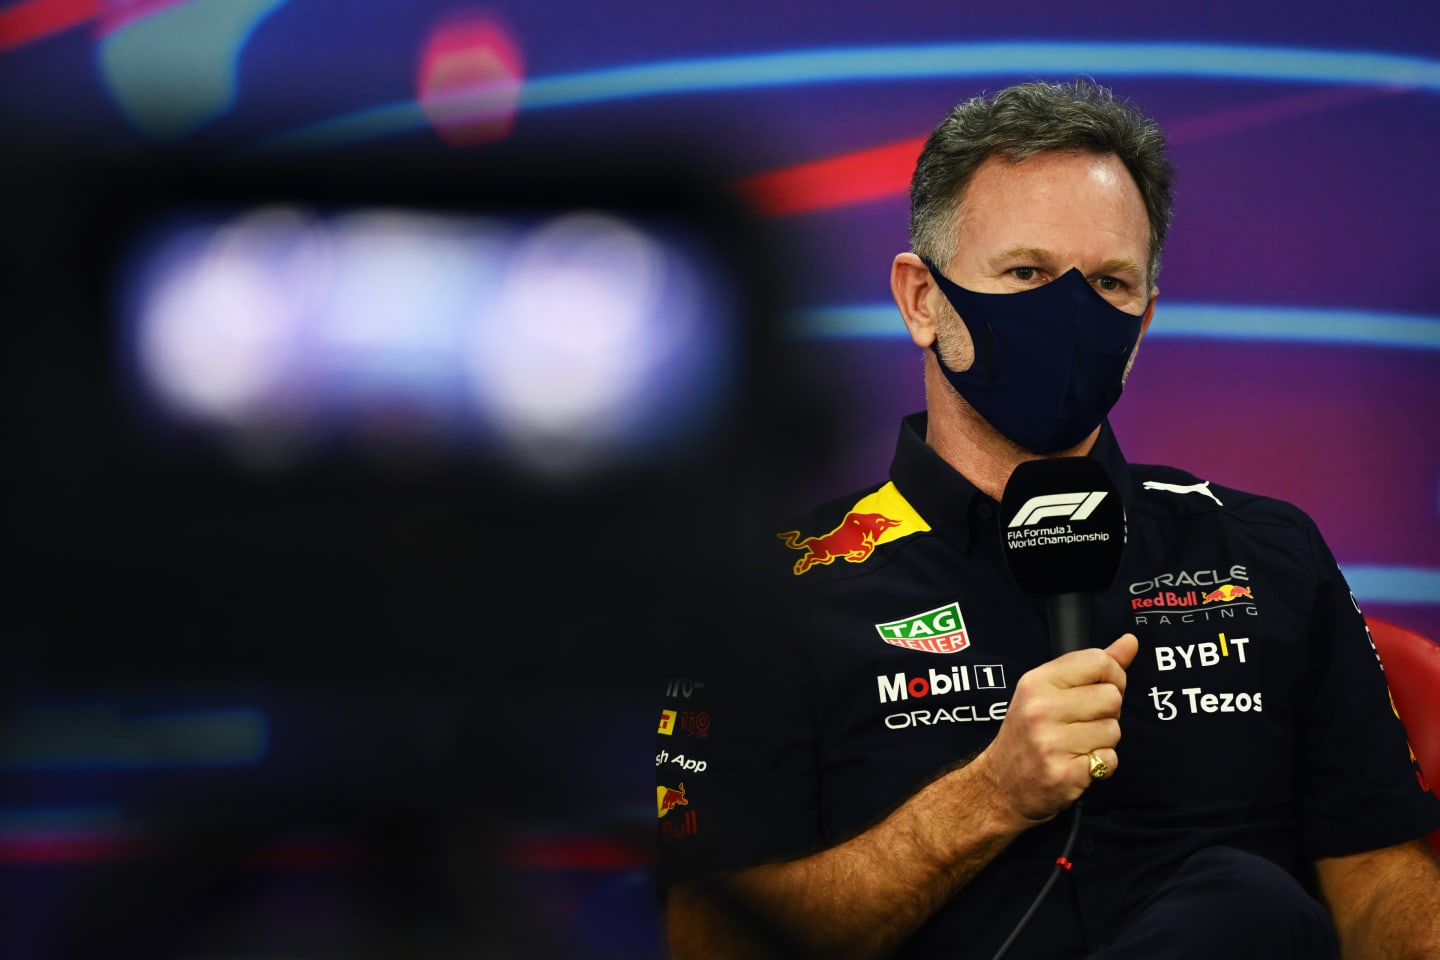 BAHRAIN, BAHRAIN - MARCH 19: Red Bull Racing Team Principal Christian Horner talks in the Team Principals Press Conference before final practice ahead of the F1 Grand Prix of Bahrain at Bahrain International Circuit on March 19, 2022 in Bahrain, Bahrain. (Photo by Clive Mason/Getty Images)